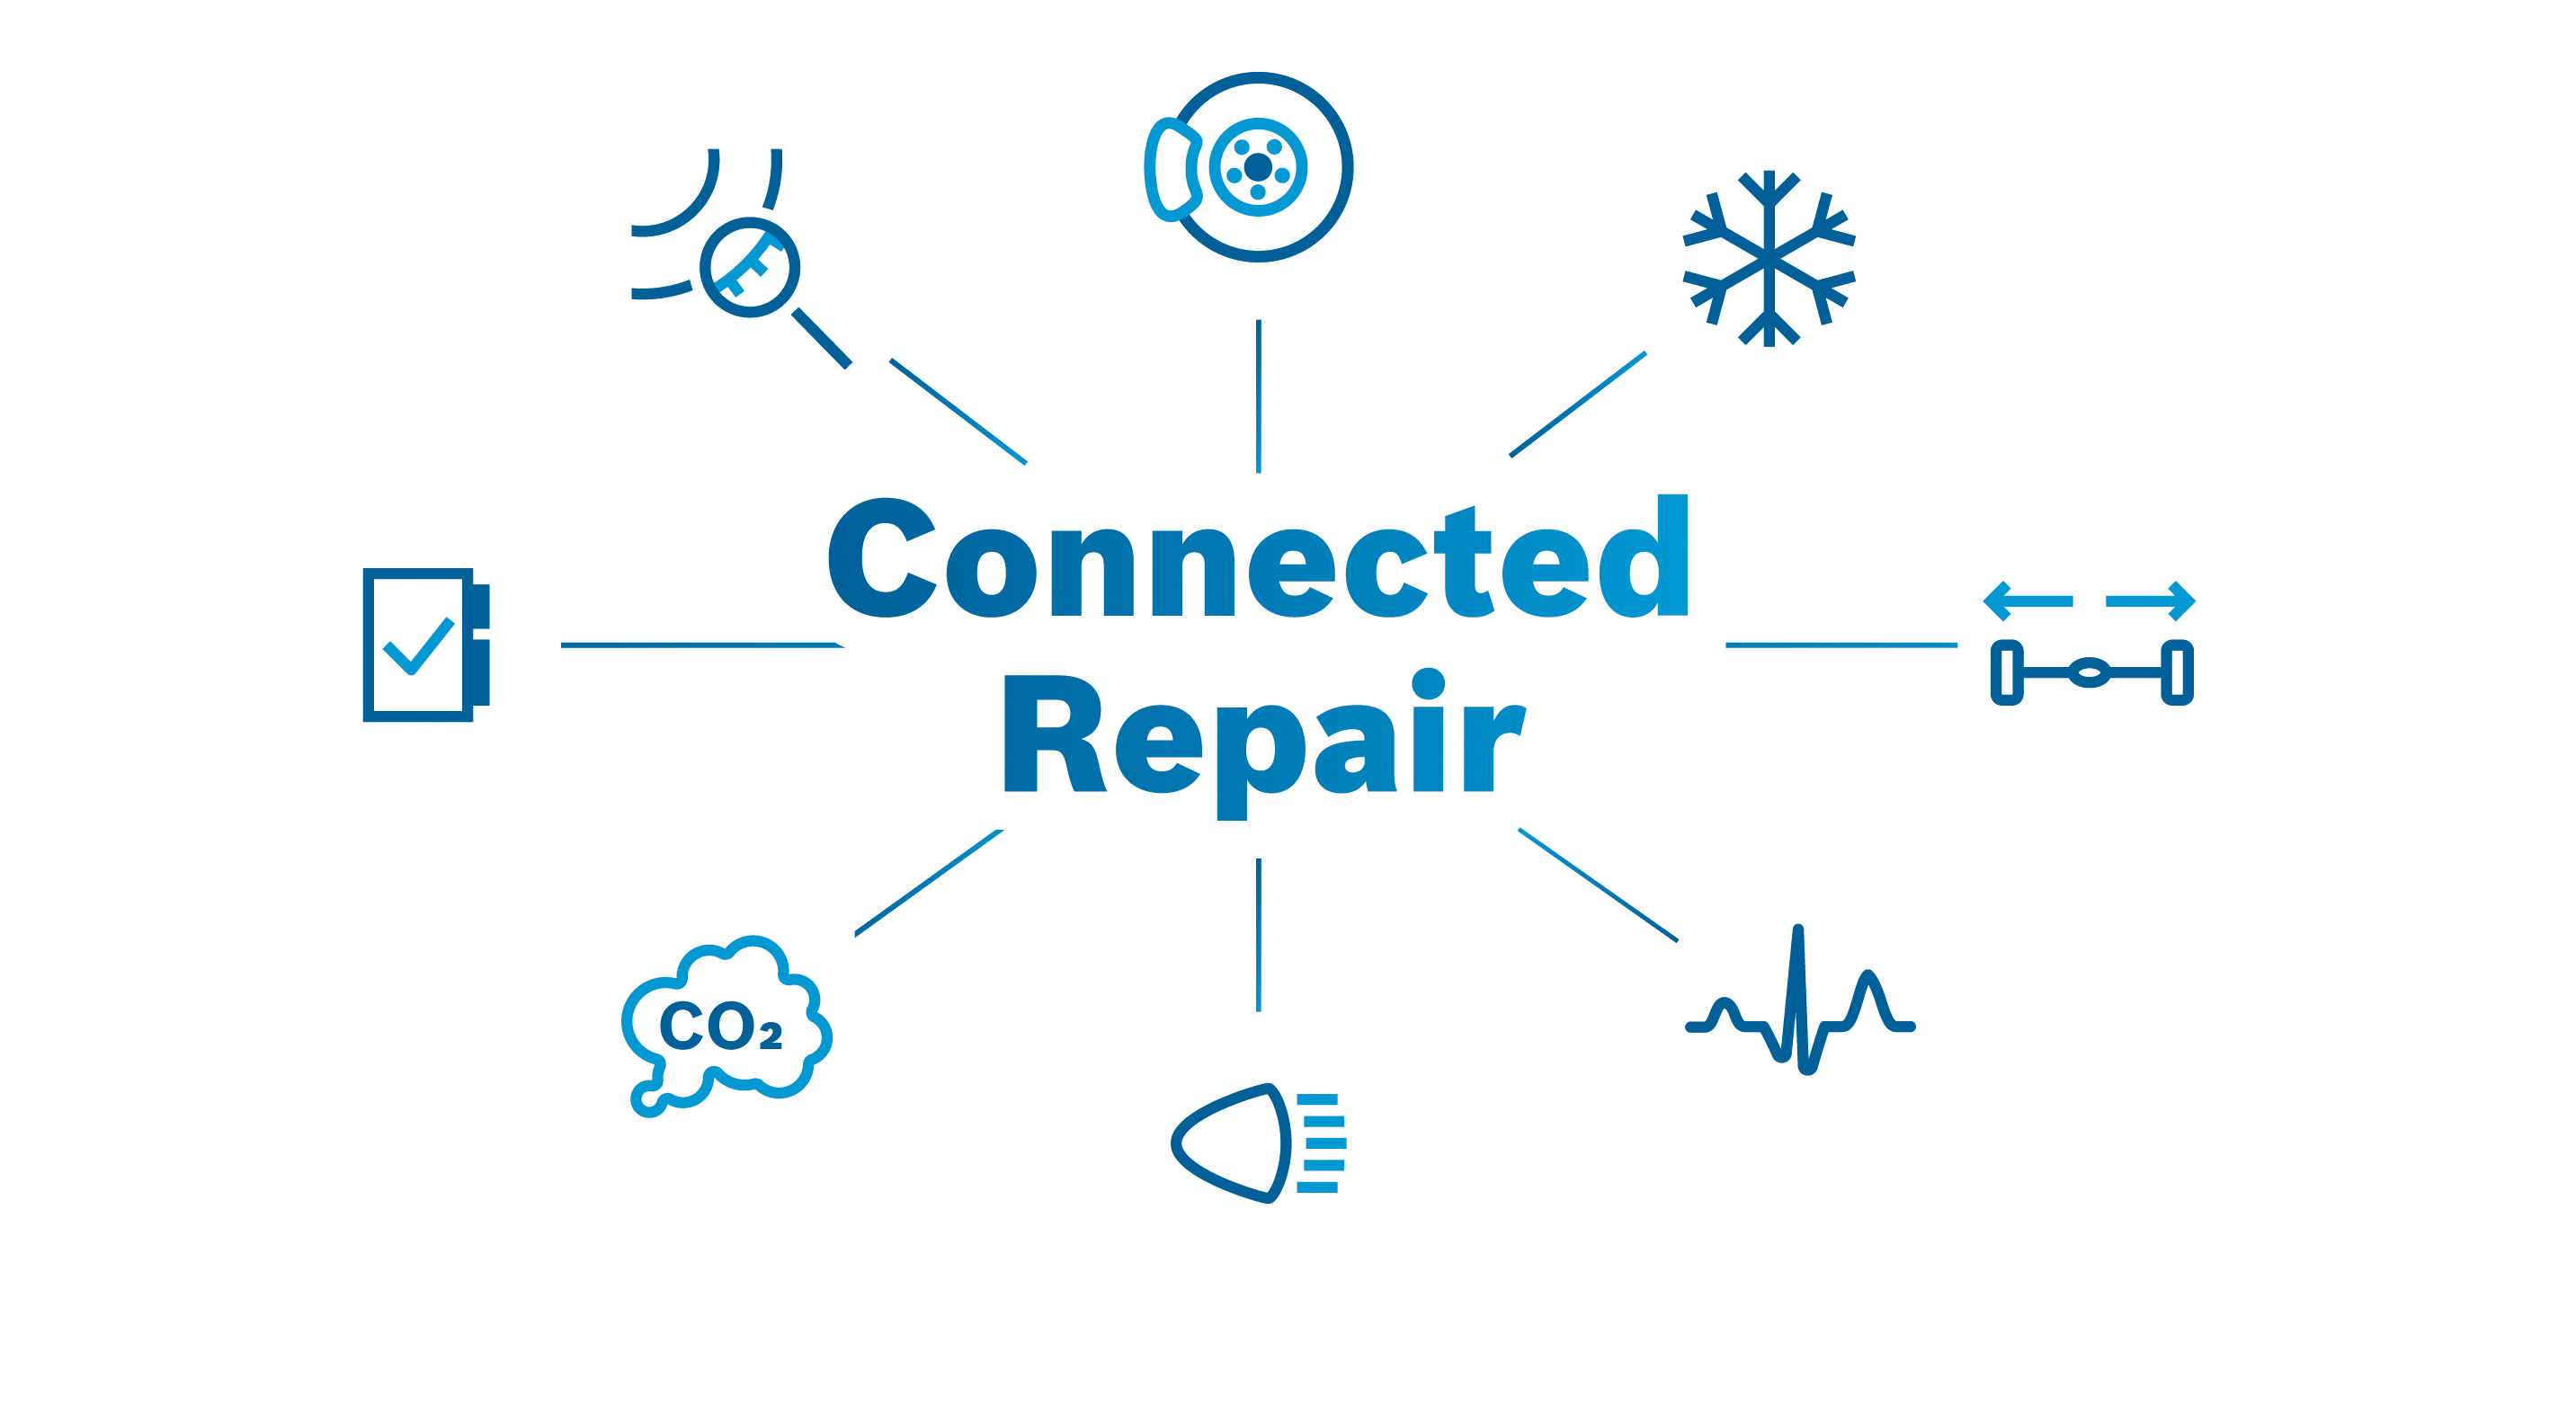 Nuovo software "Connected Repair" di Bosch